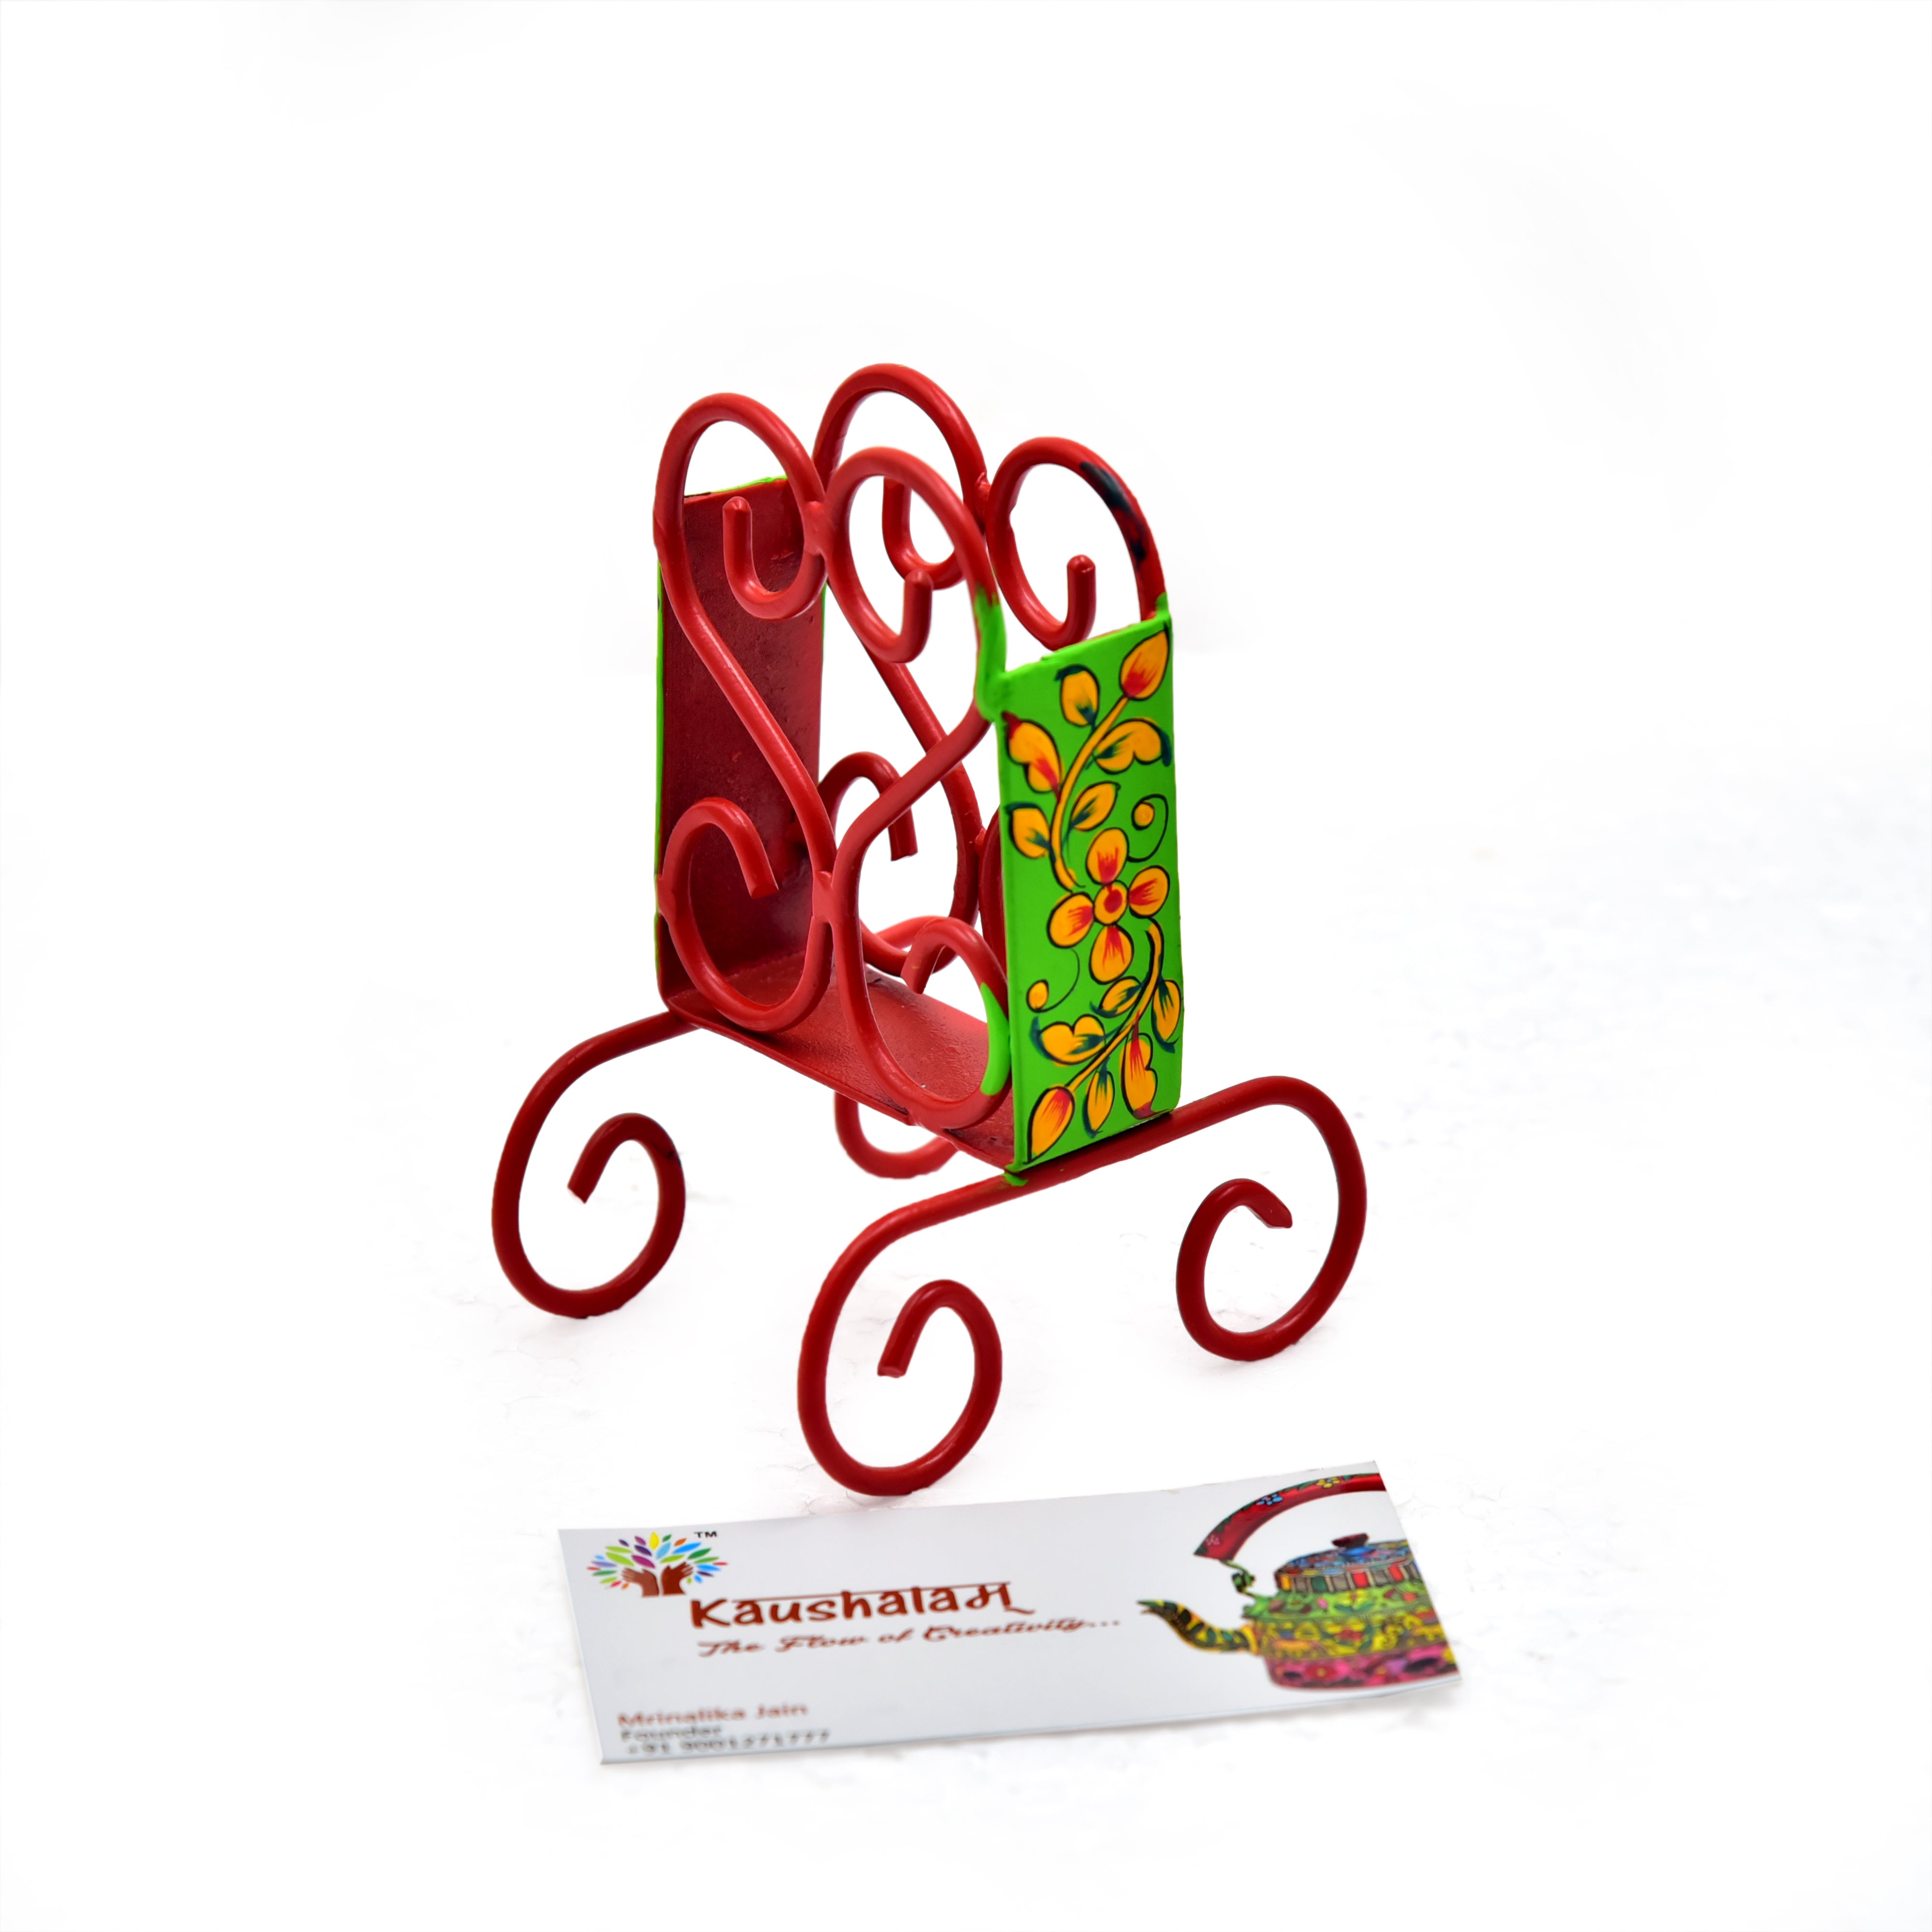 HAND PAINTED BUSINESS CARD HOLDER - RED & FLORESCENT GREEN